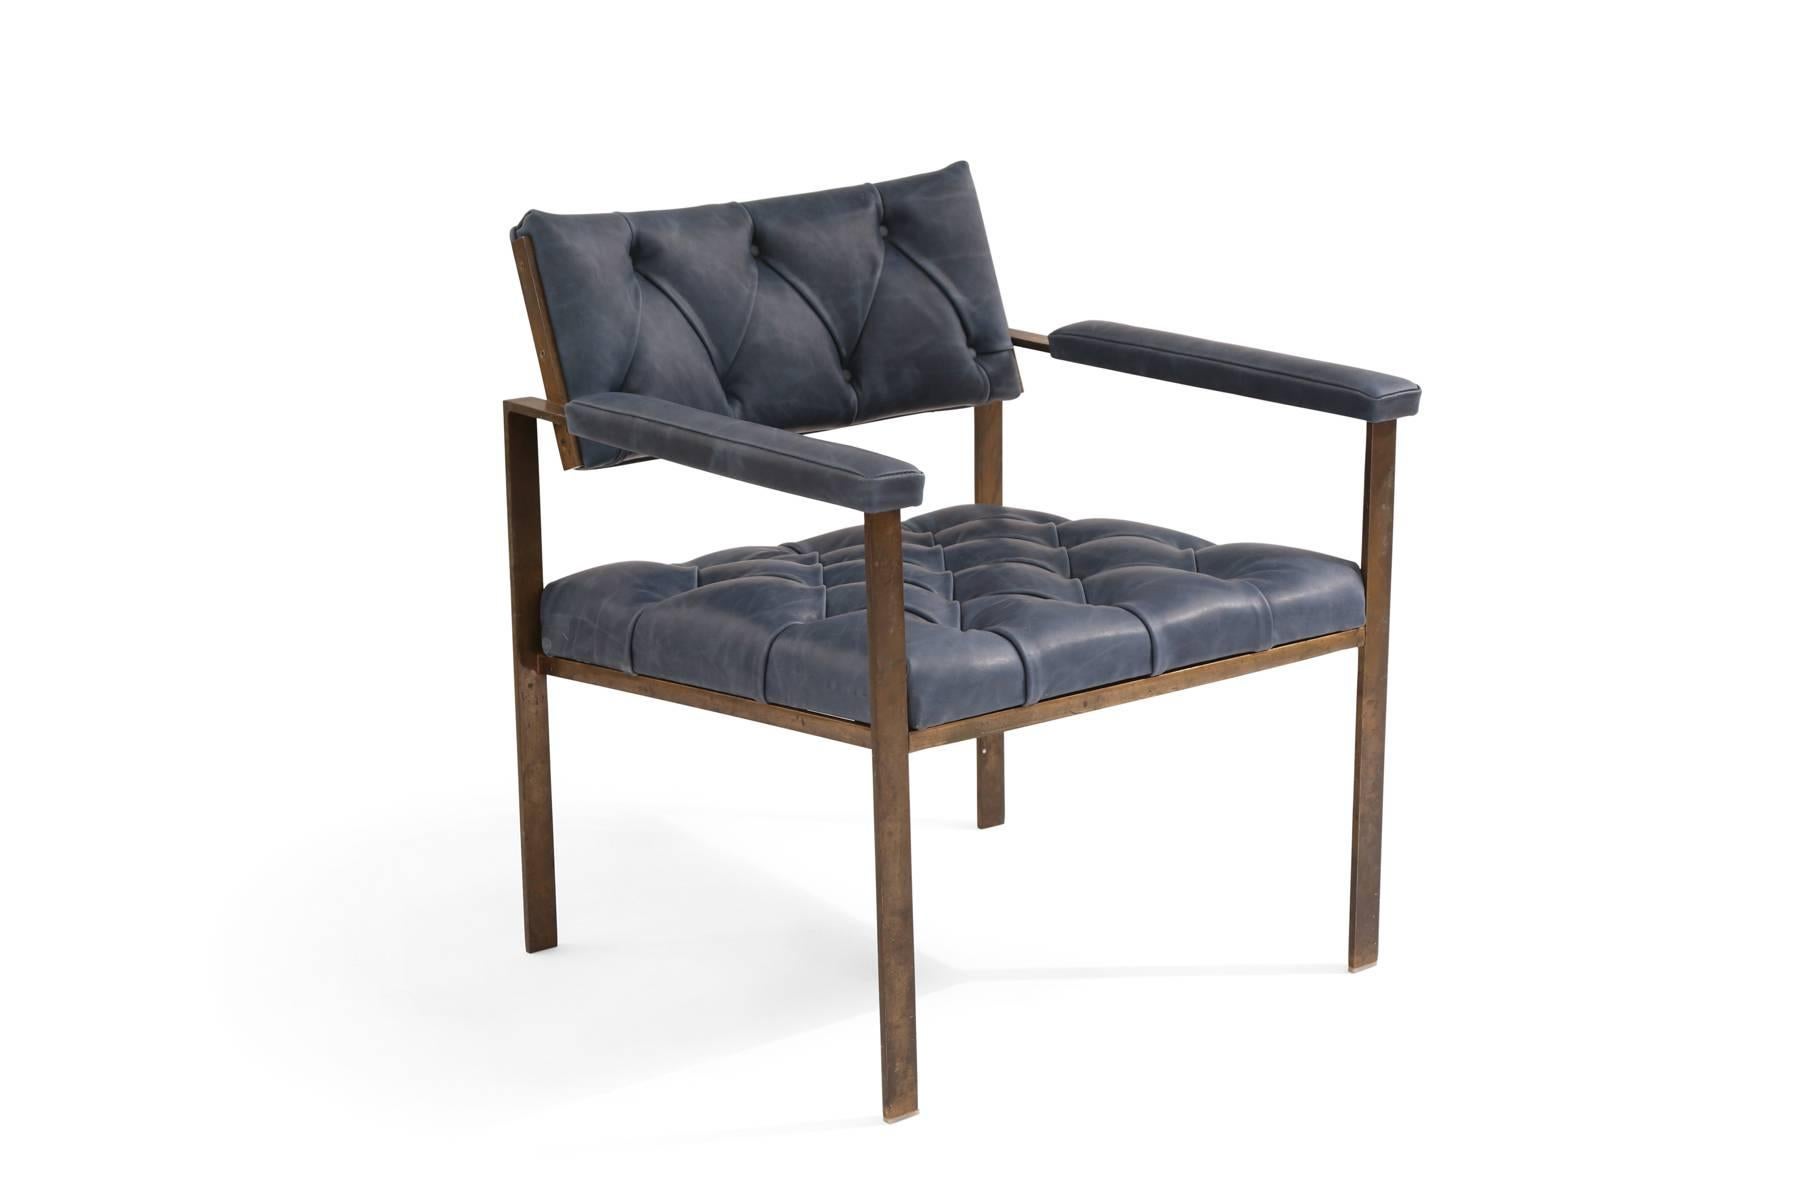 Pair of Harvey Probber bronze and leather armchairs, circa mid-1960s. These stunning examples have patinated bronze frames and have been newly upholstered in a diamond tufted perfectly broken in blue leather. Price listed is for the pair.